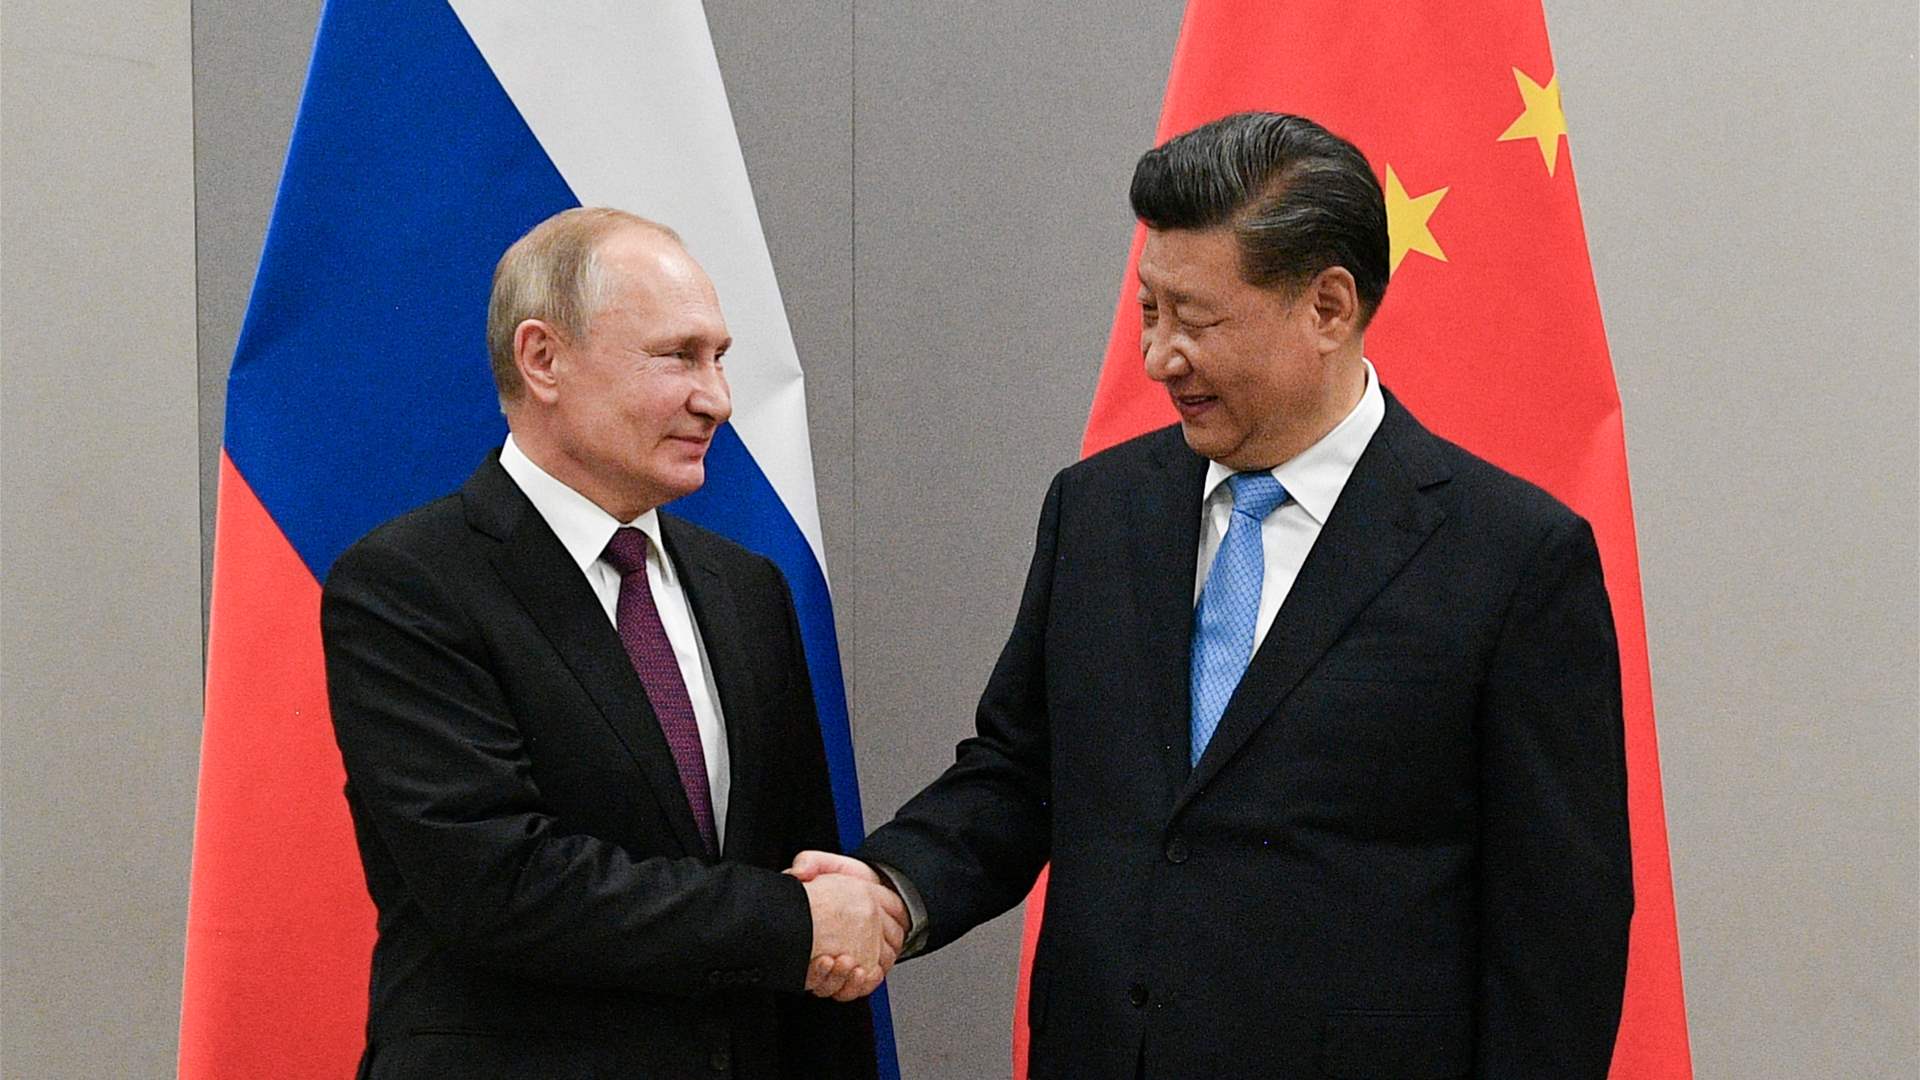 Moscow and Beijing share desire for equal cooperation in world: Putin